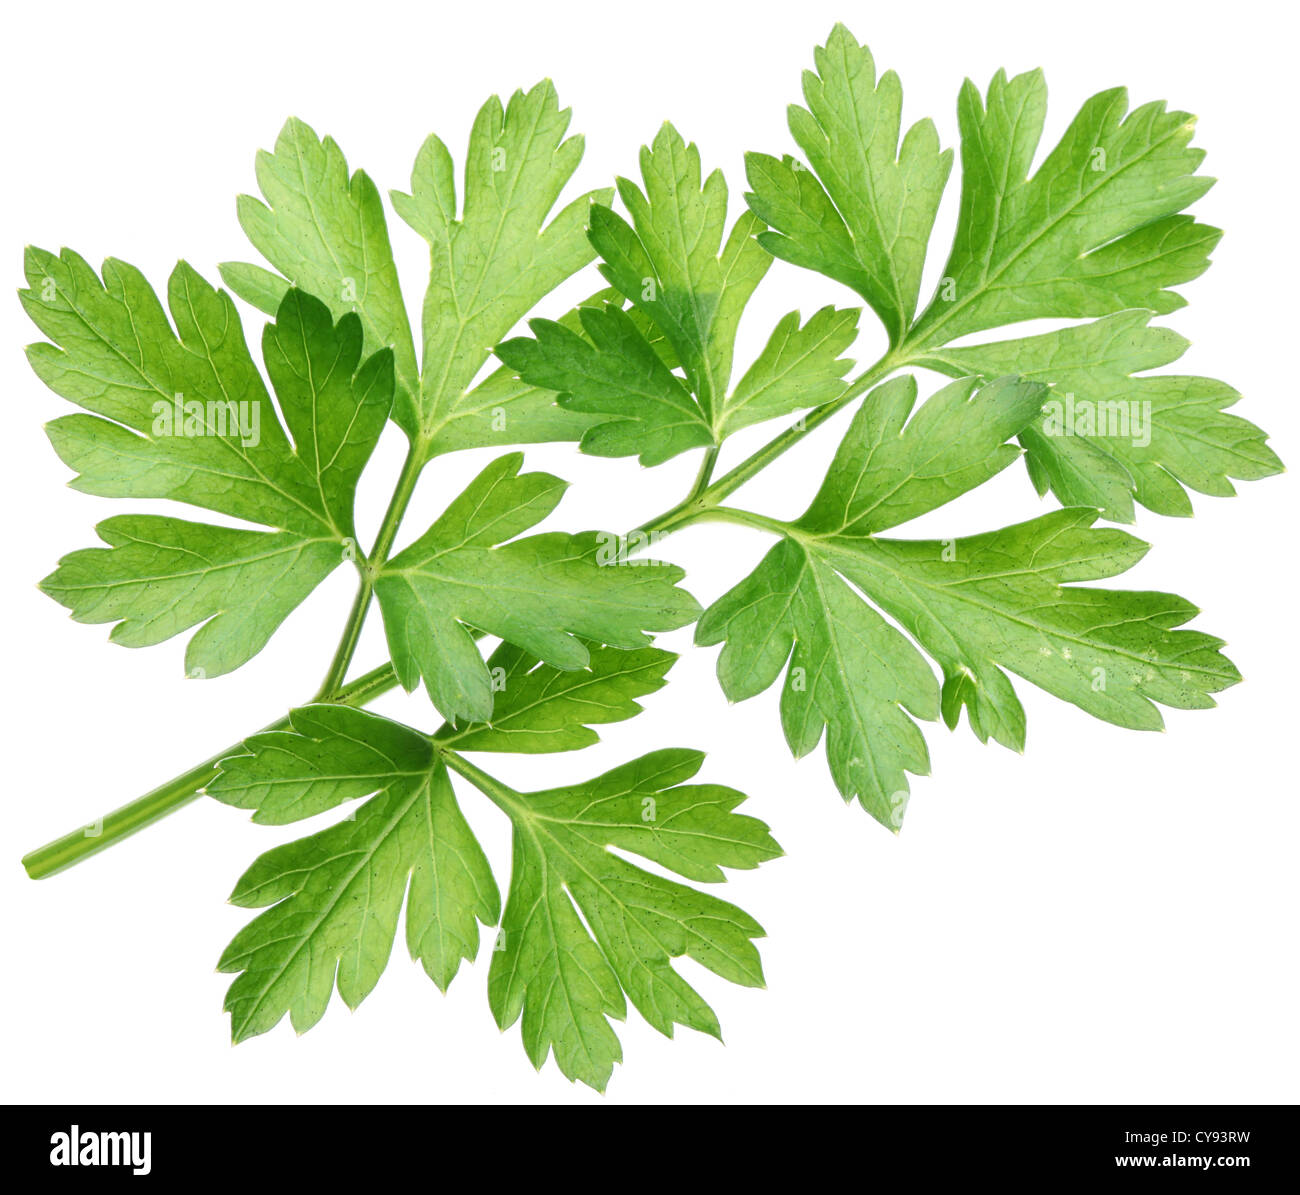 Parsley on a white background. Stock Photo